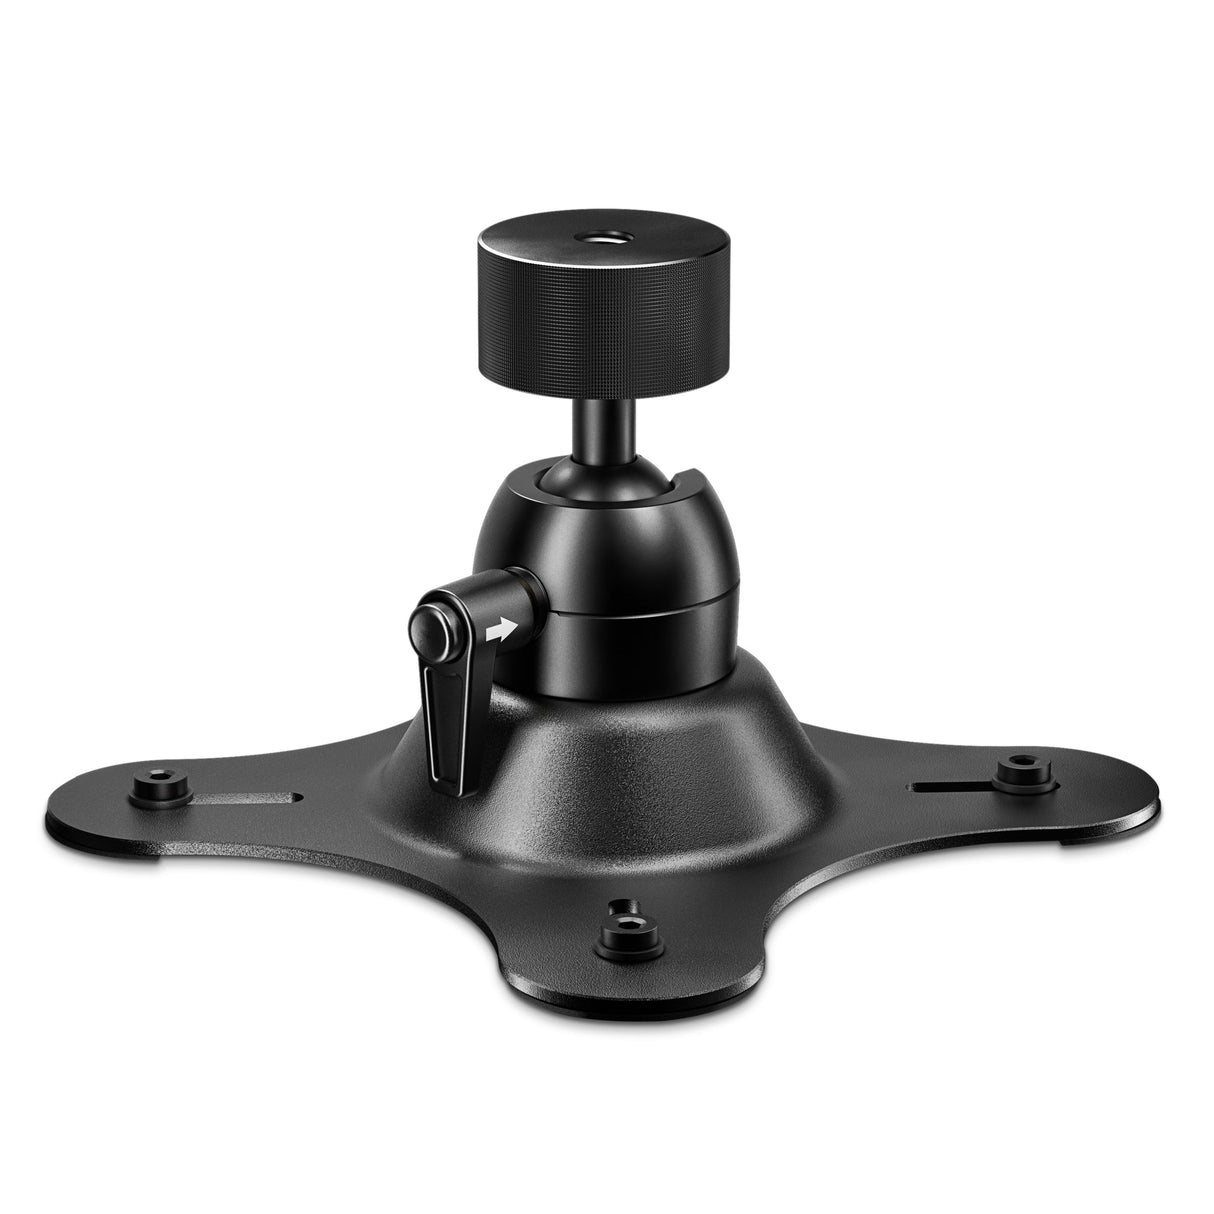 RODE VESA Mount Adjustable Mounting System for RODECaster Pro II and RODECaster Duo